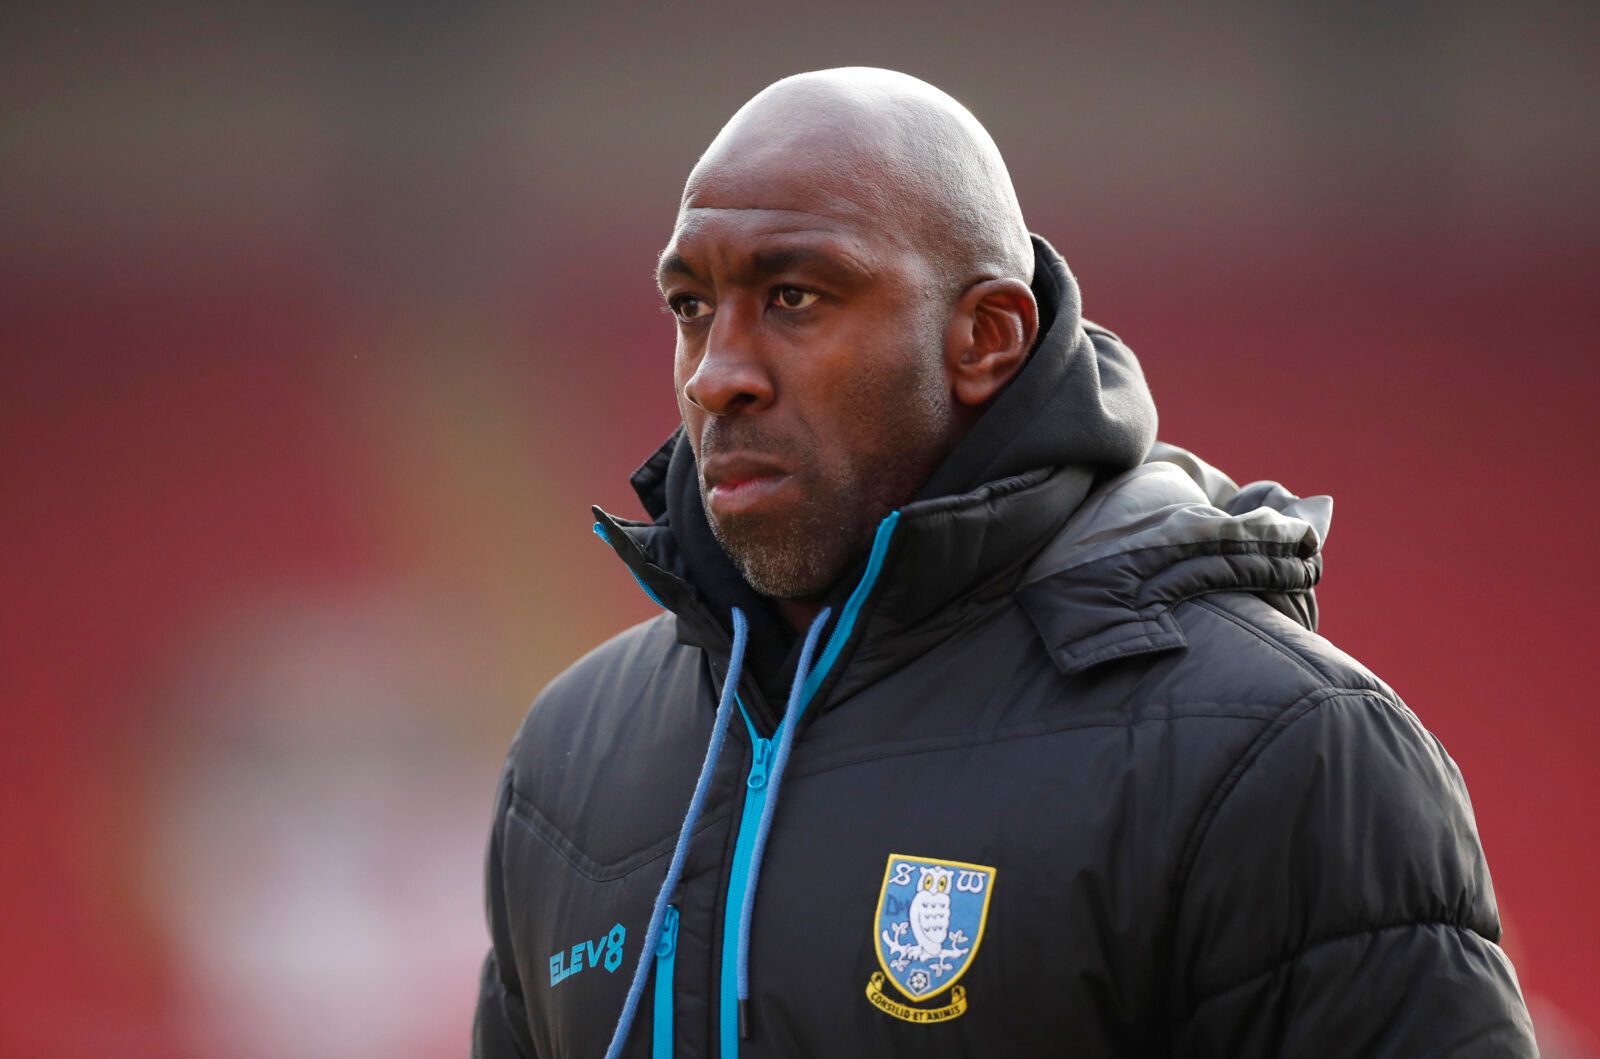 Soccer Football - Championship - Barnsley v Sheffield Wednesday - Oakwell, Barnsley, Britain - March 20, 2021 Sheffield Wednesday manager Darren Moore Action Images/Andrew Boyers EDITORIAL USE ONLY. No use with unauthorized audio, video, data, fixture lists, club/league logos or 'live' services. Online in-match use limited to 75 images, no video emulation. No use in betting, games or single club /league/player publications.  Please contact your account representative for further details.